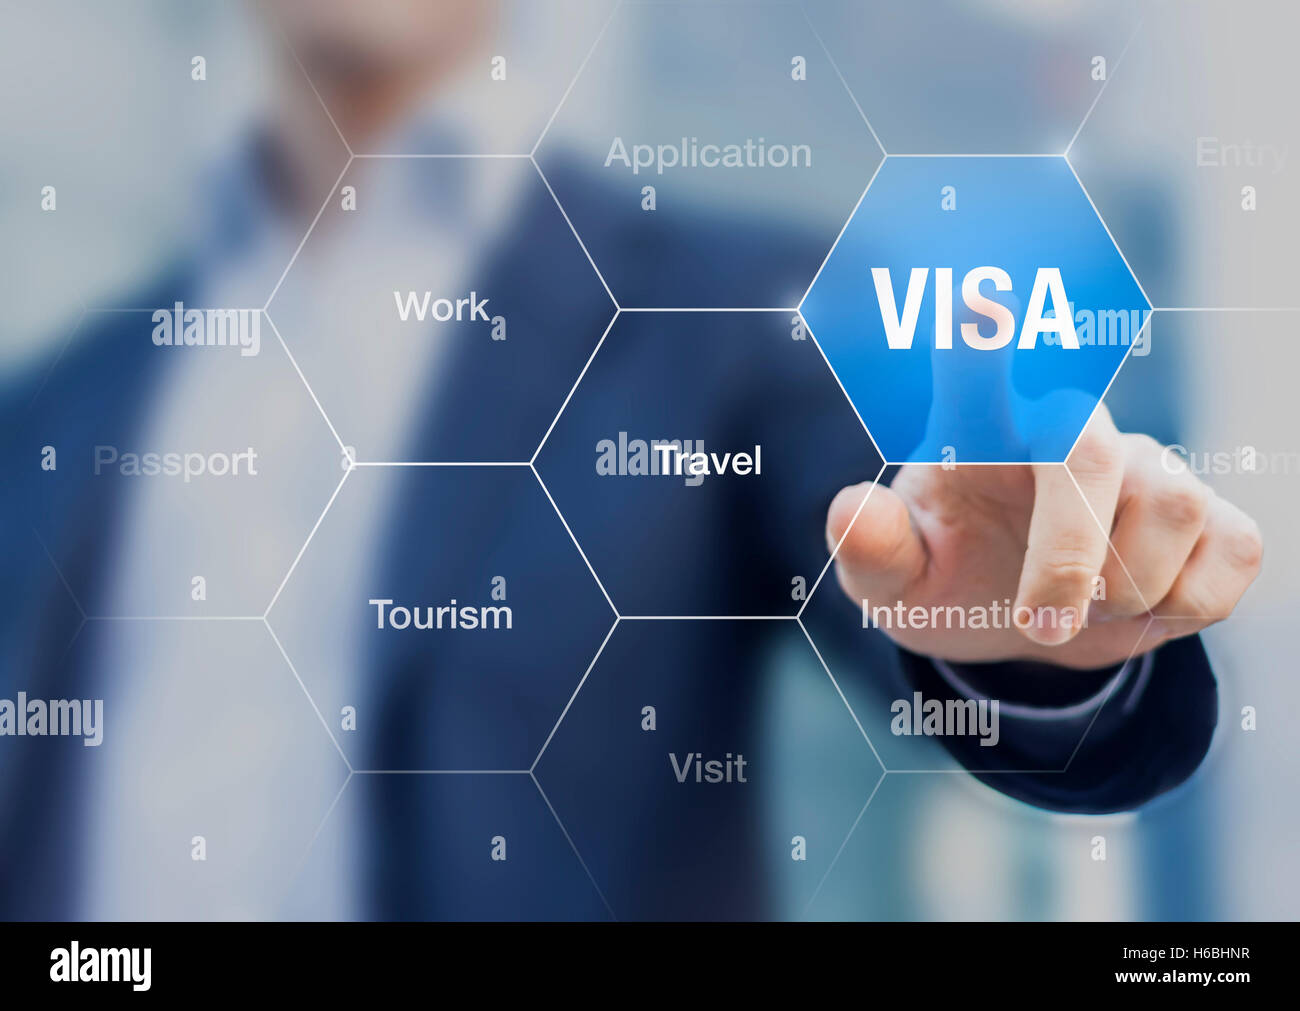 Concept about visa for traveling or working abroad Stock Photo